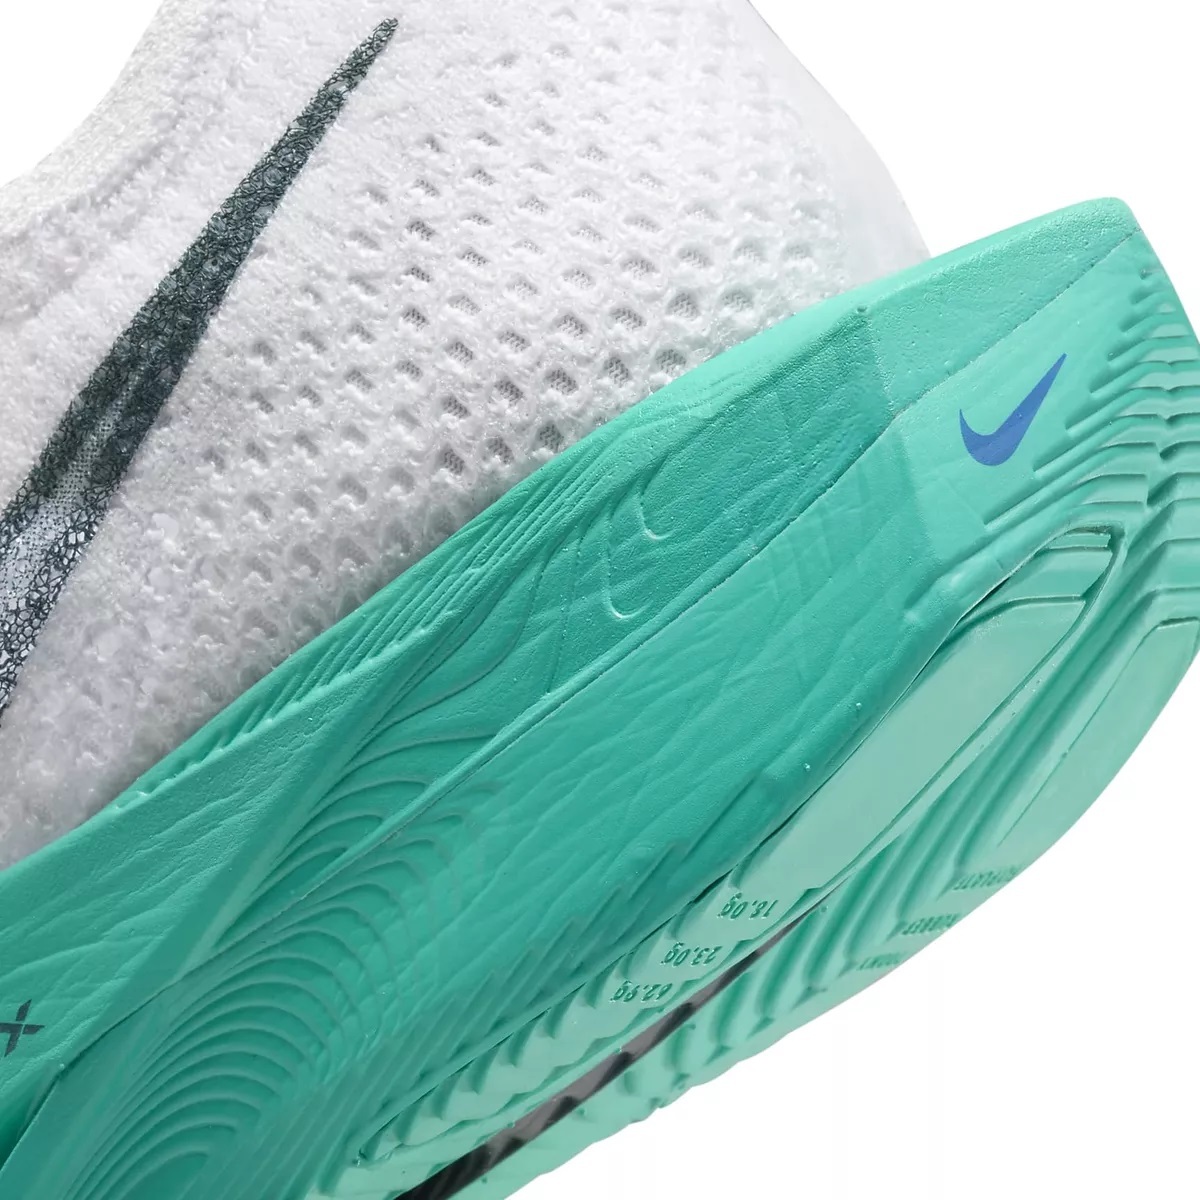 ☆NIKE ZOOMX VAPORFLY NEXT％ 3 白/濃緑/青緑/青 27.5cm ナイキ ズームX ヴェイパーフライ ネクスト％ 3 DV4129-102の画像7